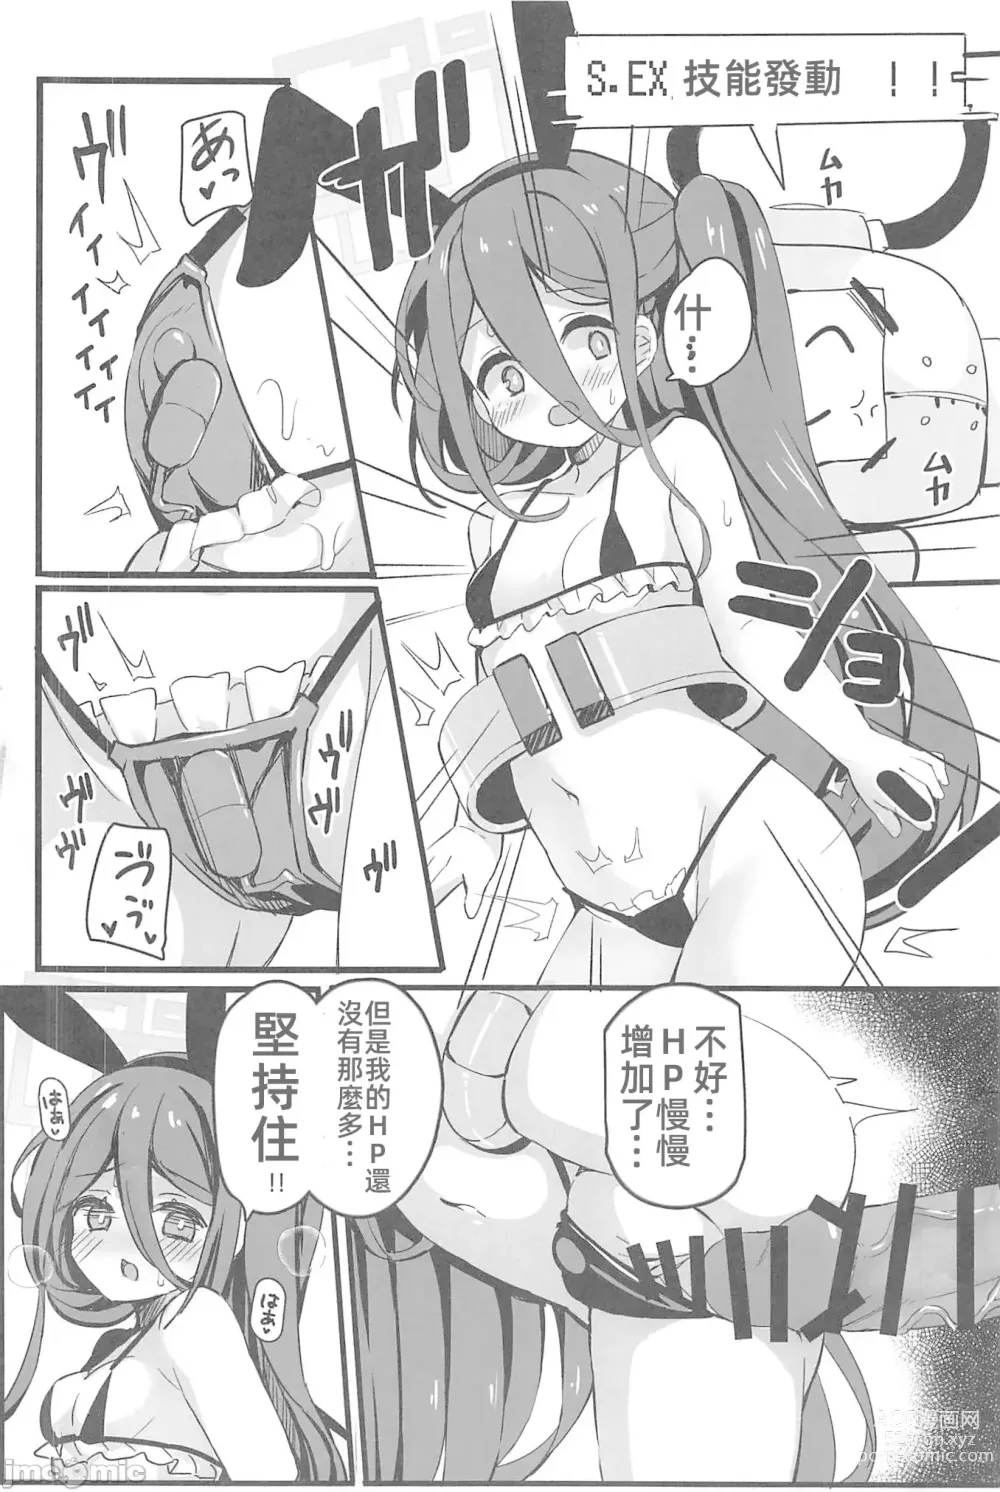 Page 15 of doujinshi 絕對要攻克給你看!!